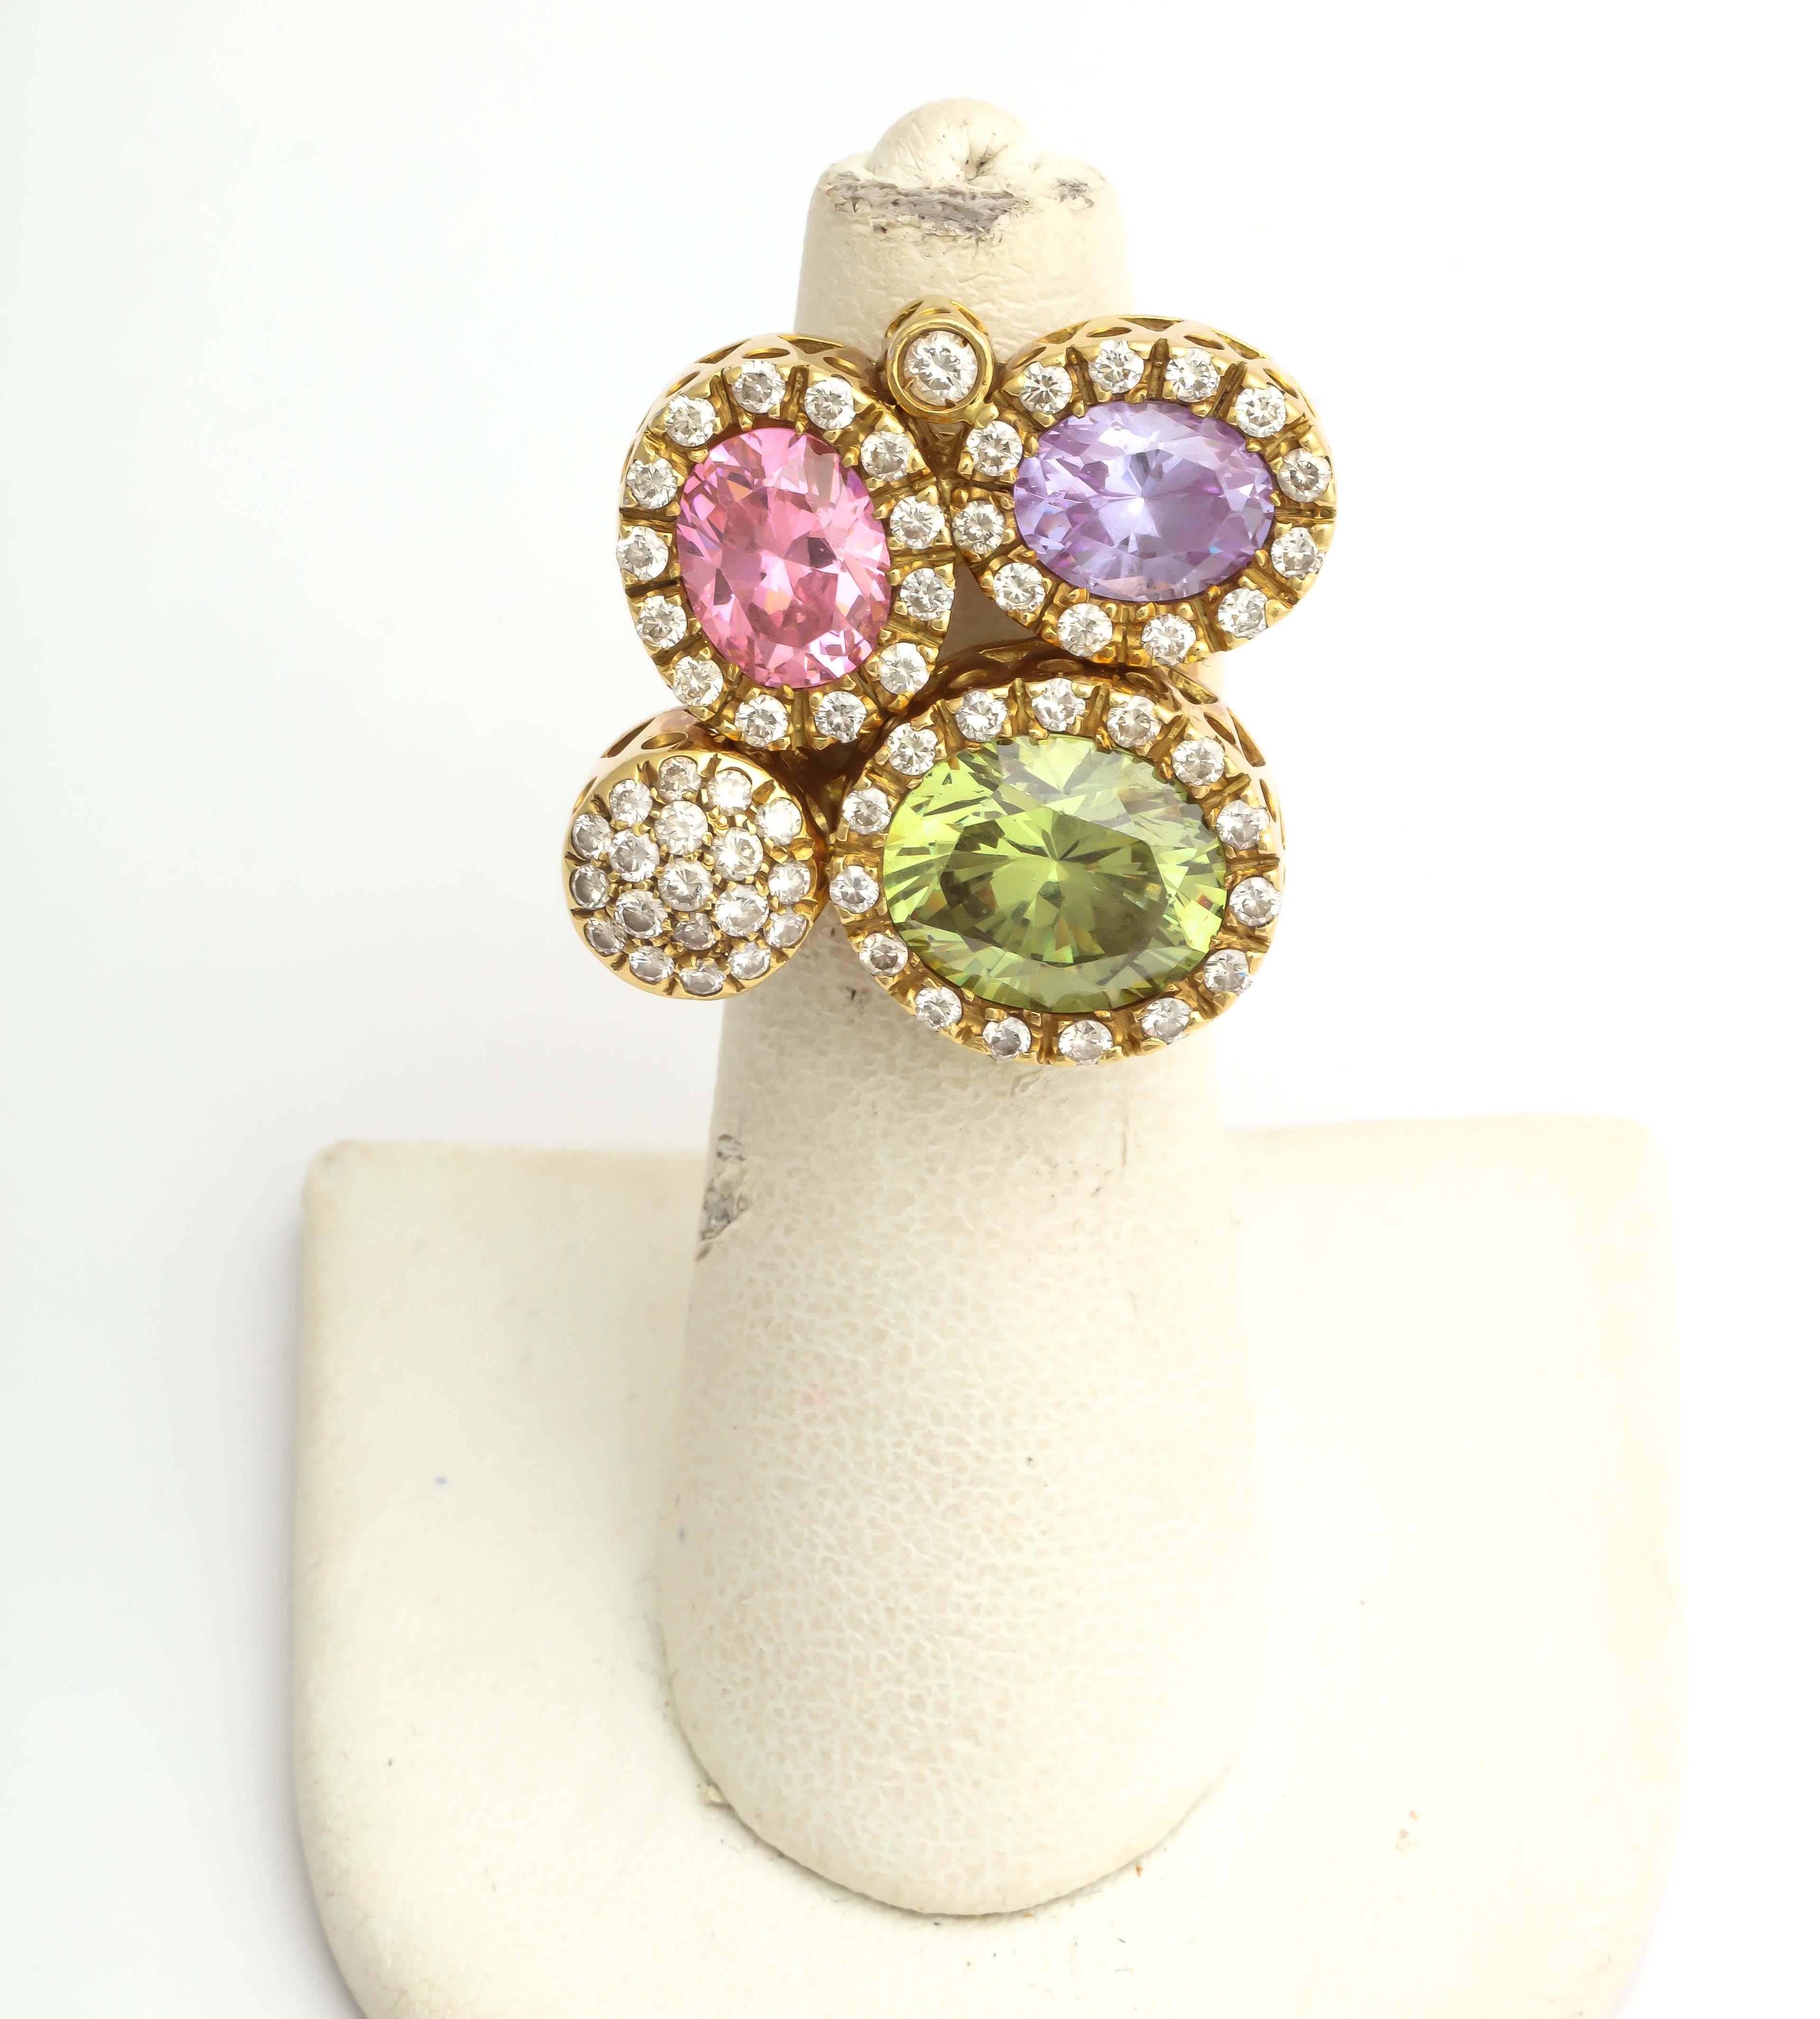 18kt Yellow gold large cocktail ring embellished with 3 pastel-colored stones of 1 peridot, 1 amethyst and 1 pink tourmaline stone throughout, weighing approximately 3.5 carats each. Further designed with numerous full-cut diamonds weighing